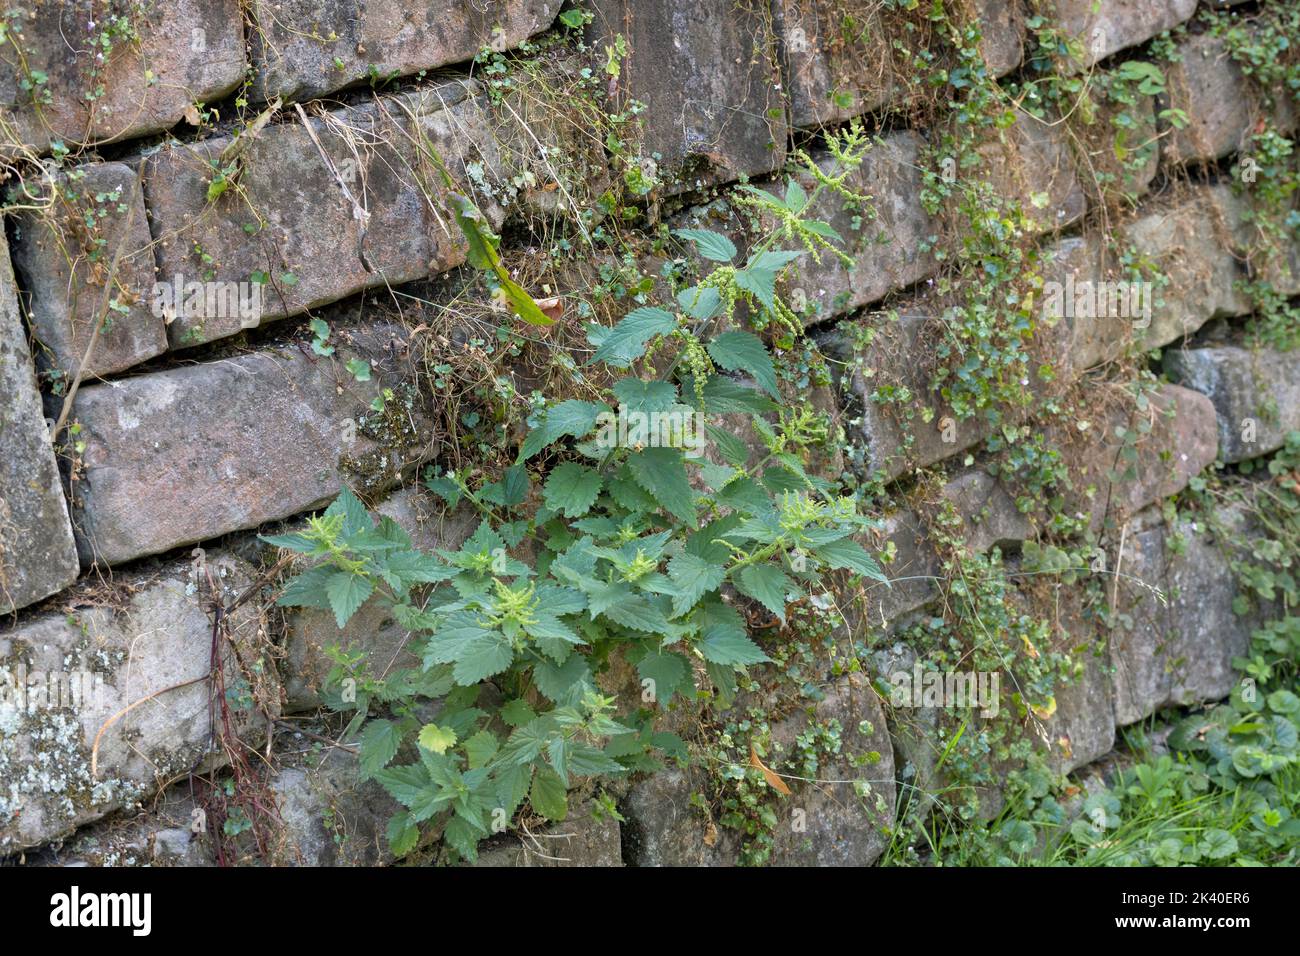 common nettle, stinging nettle, nettle leaf, nettle, stinger (Urtica dioica), growing in an old wall, Germany Stock Photo